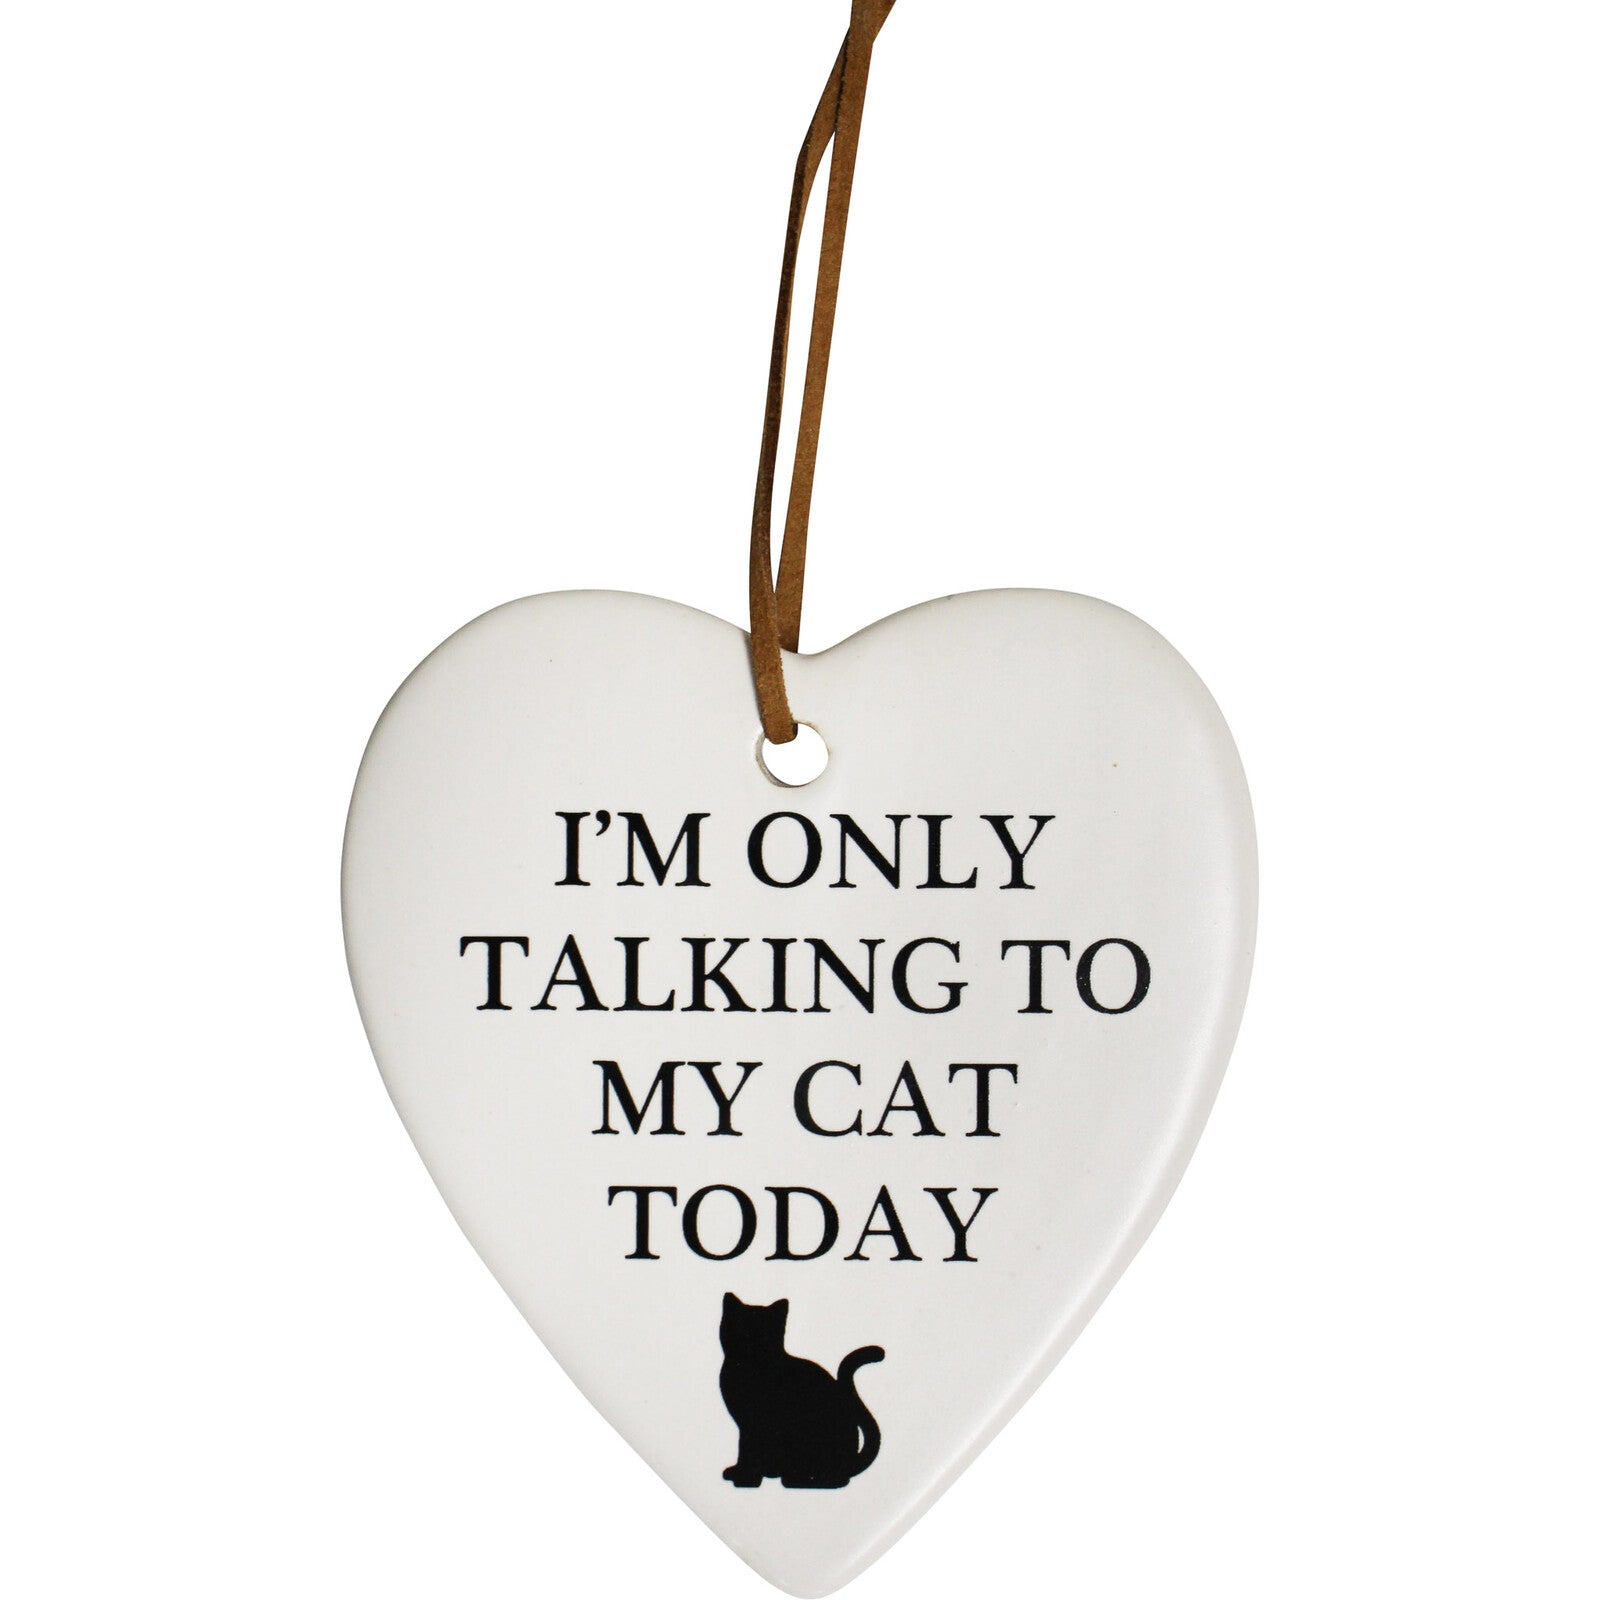 'I'm Only Talking To My Cat Today' Ceramic Heart